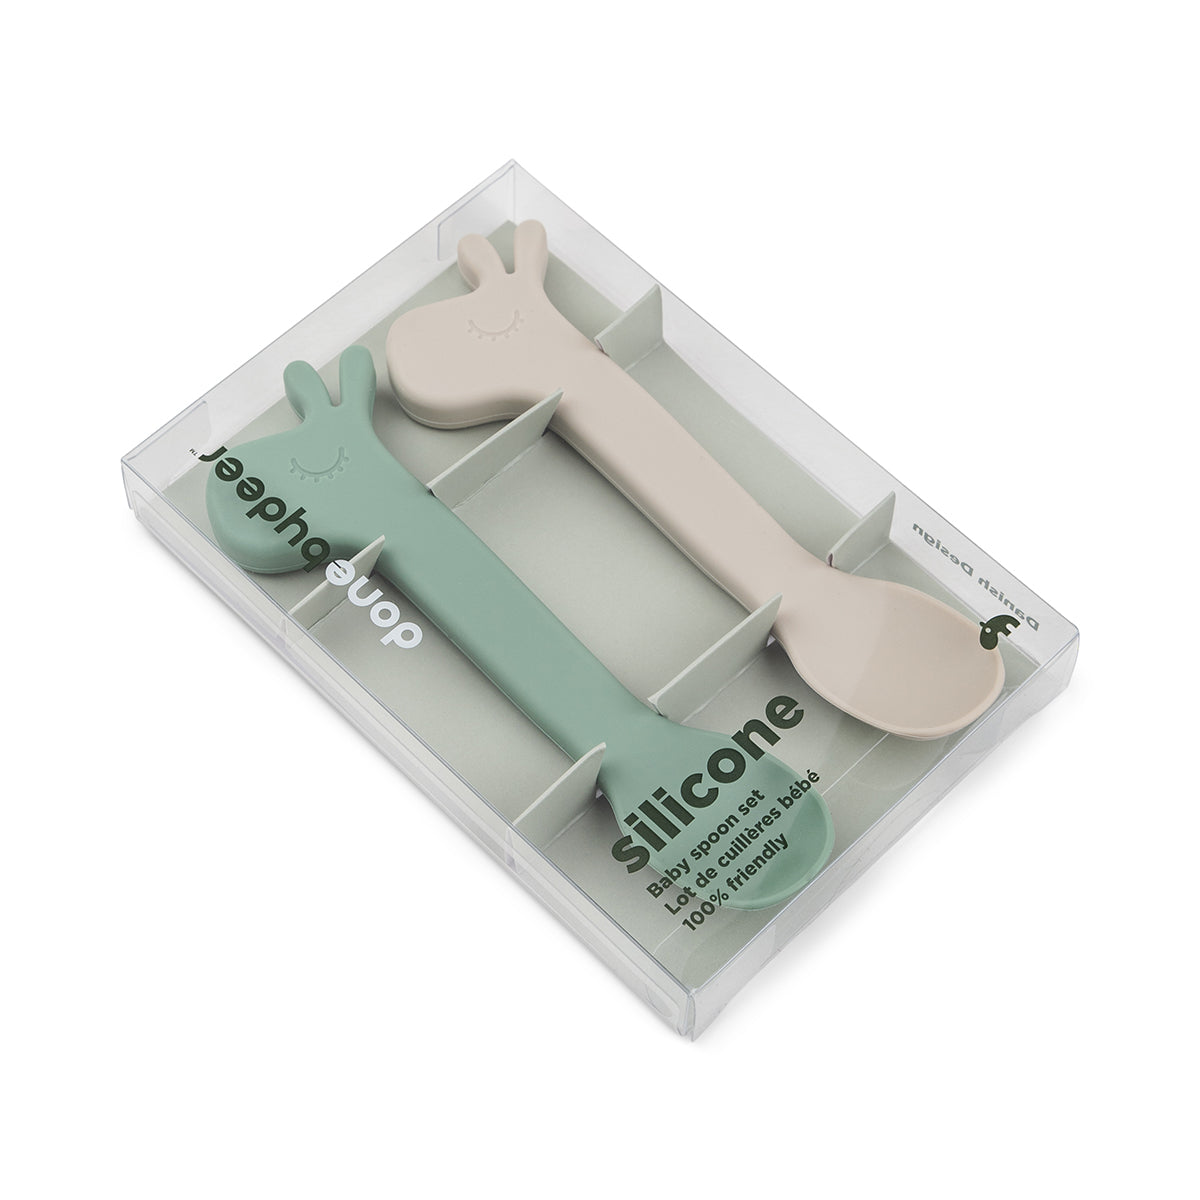 Silicone spoon 2-pack - Lalee - Green